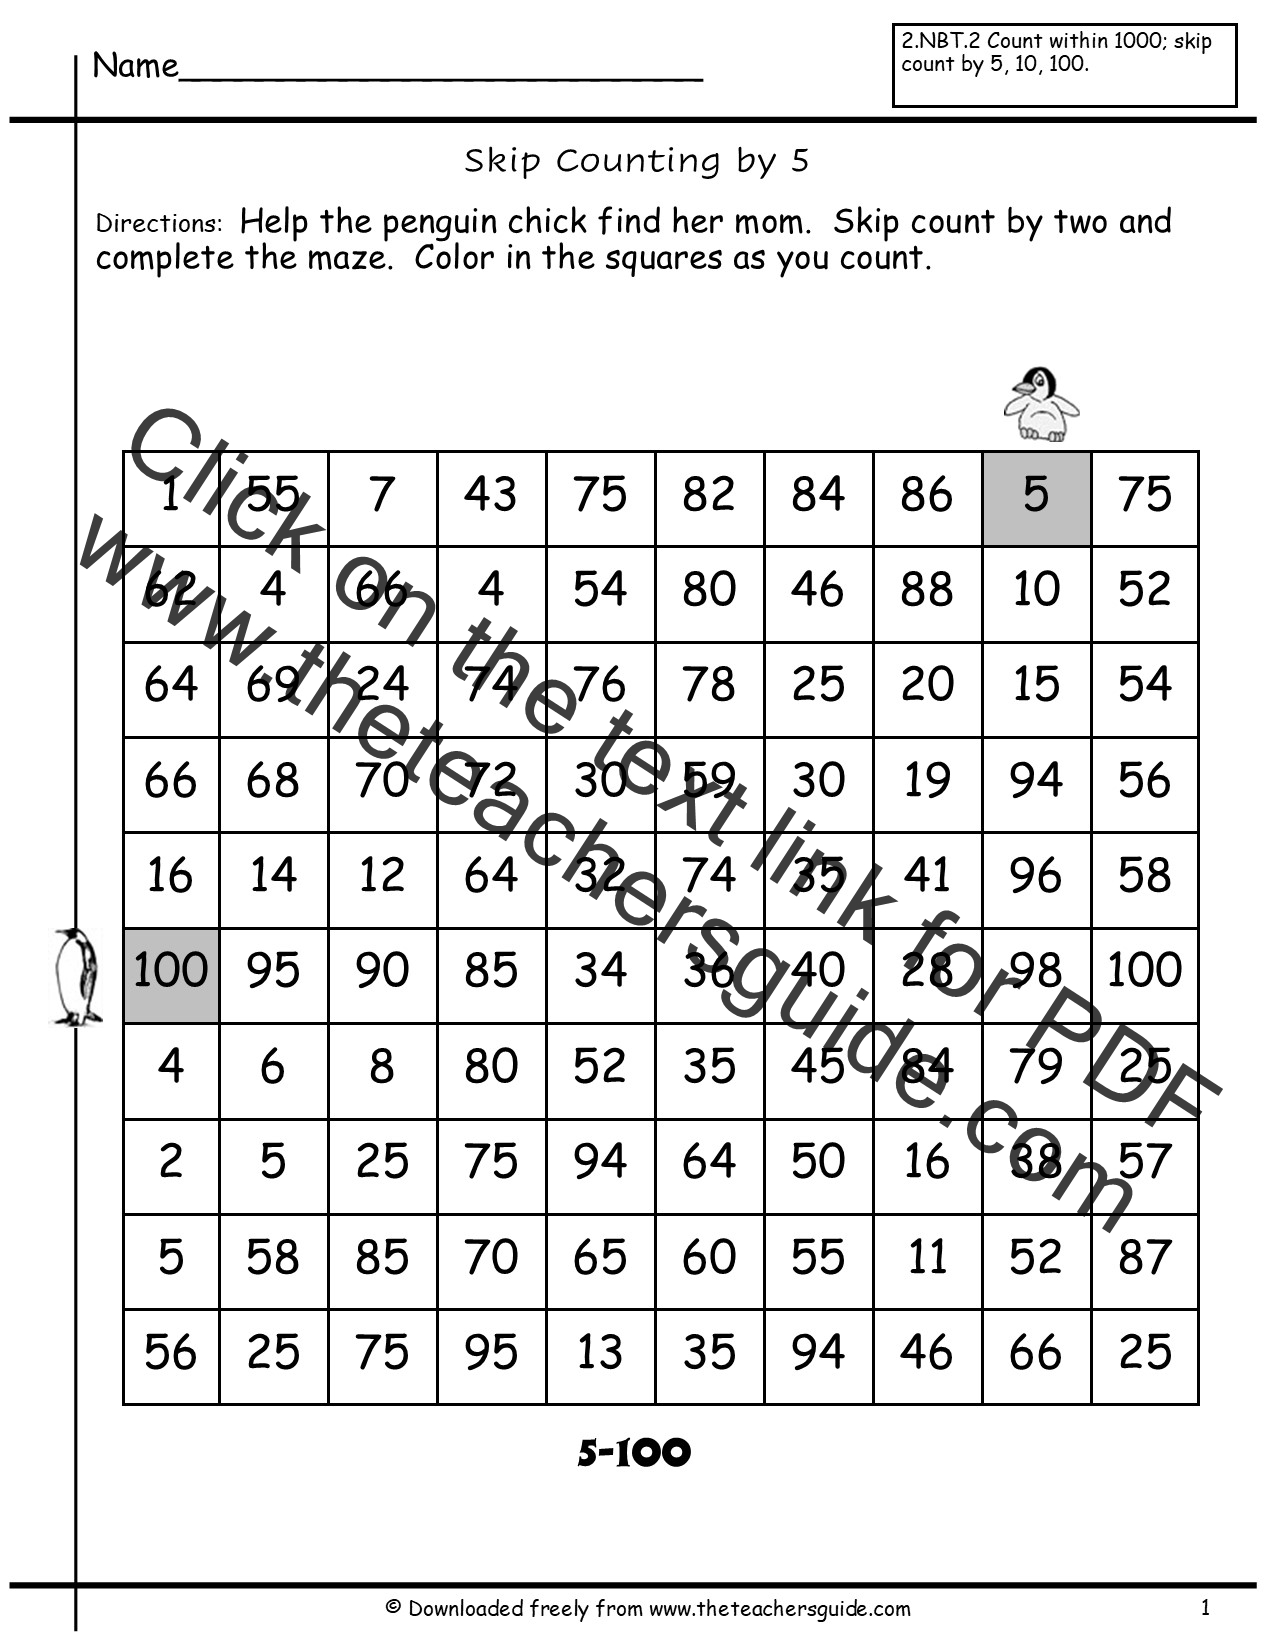 NEW 190 WORKSHEETS COUNTING BY 5 S AND 10 S Counting Worksheet